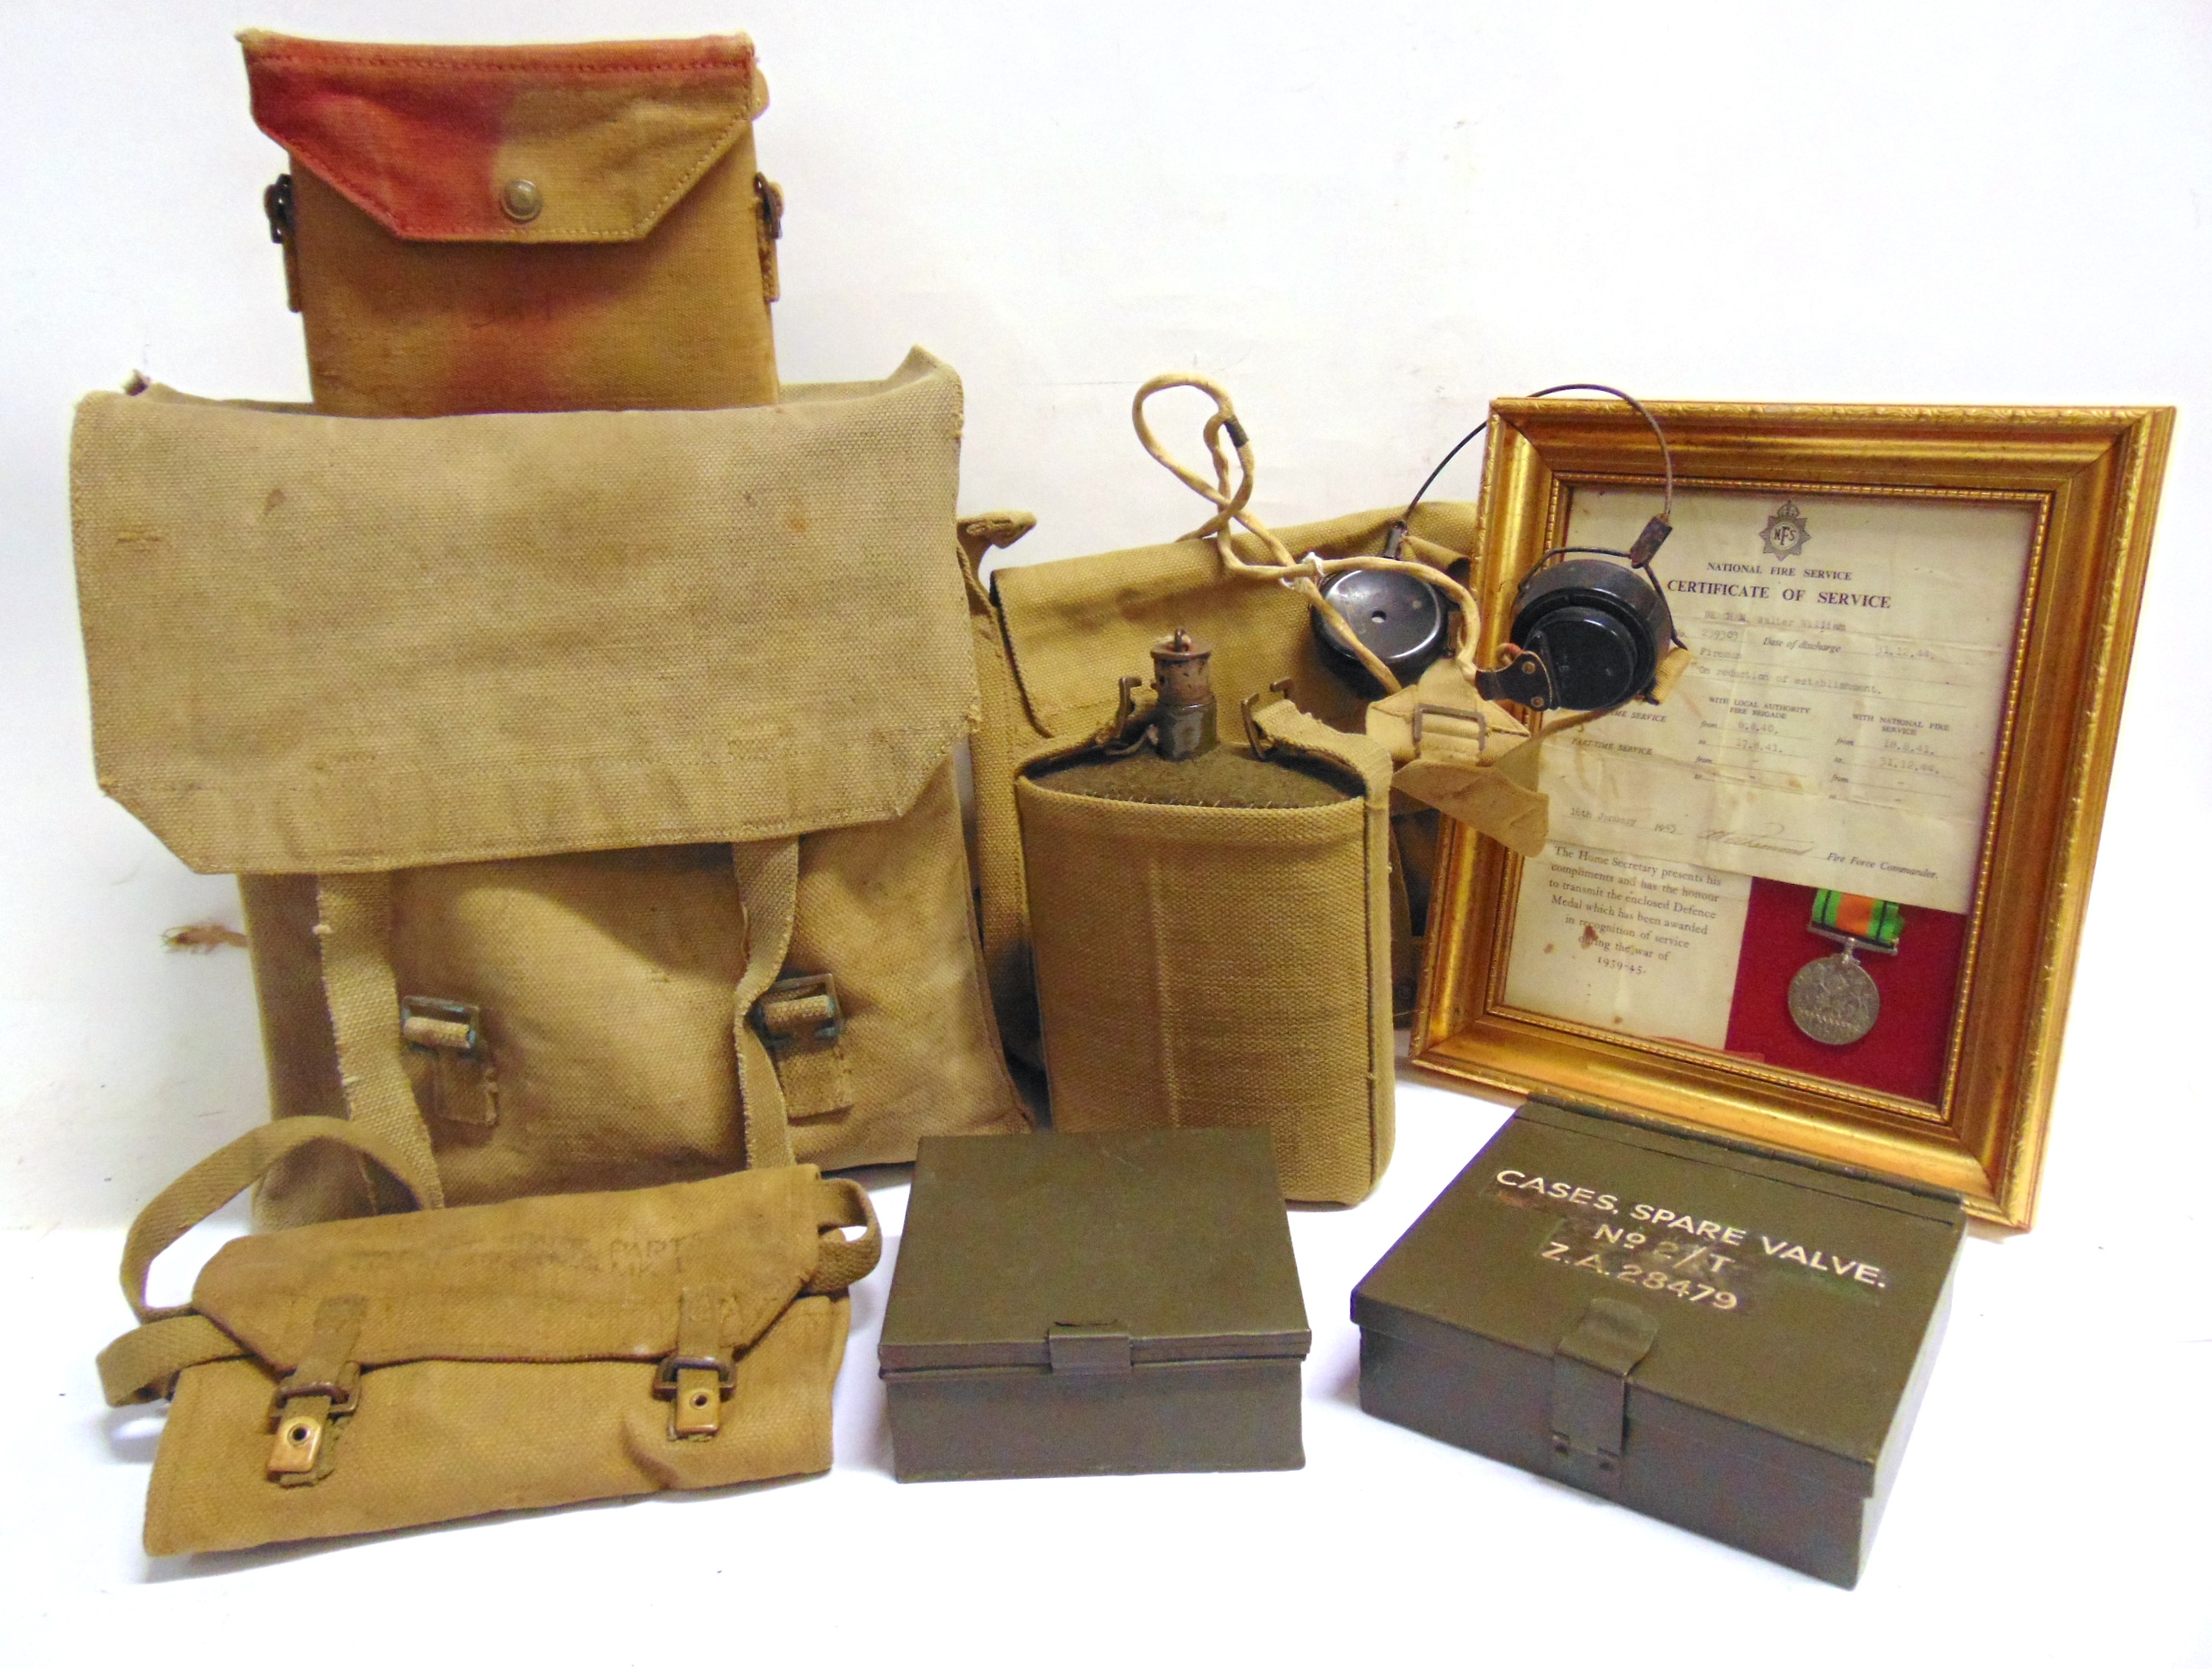 MILITARIA - ASSORTED WEBBING including a shoulder bag, dated 1941; and a small case or semi-rigid